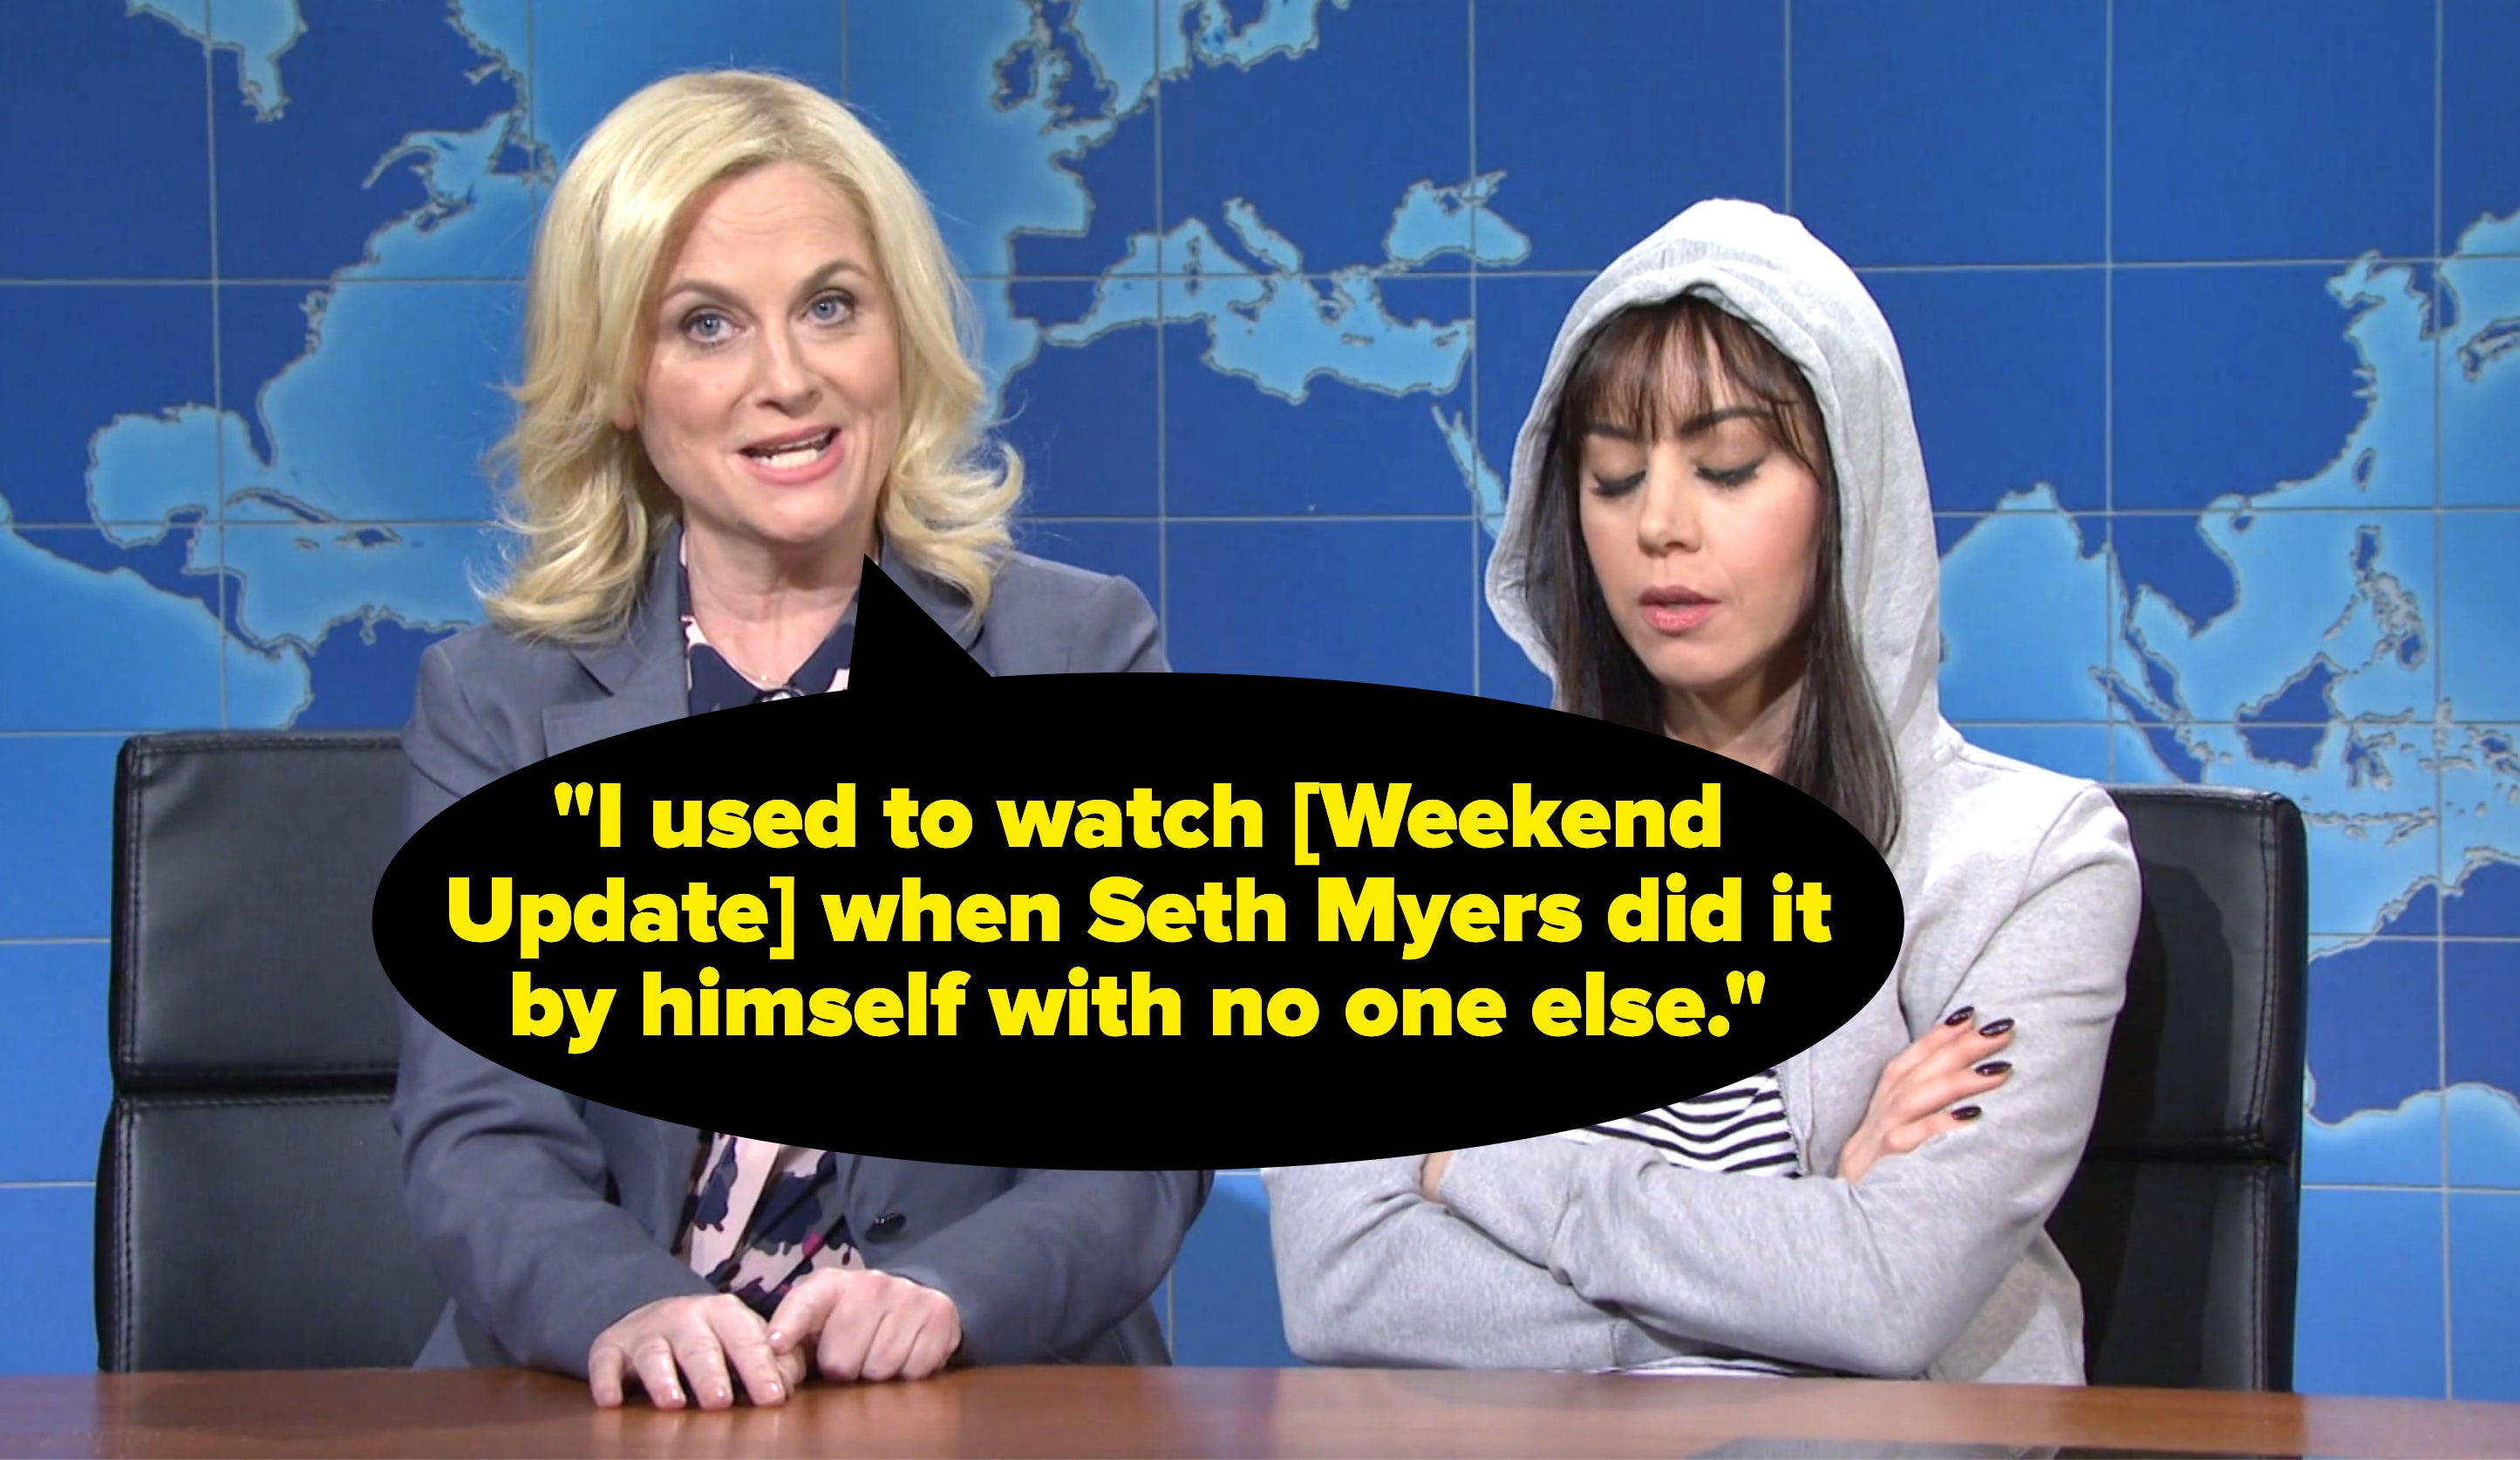 Amy says &quot;I used to watch [Weekend Update] when Seth Myers did it by himself with no else&quot;